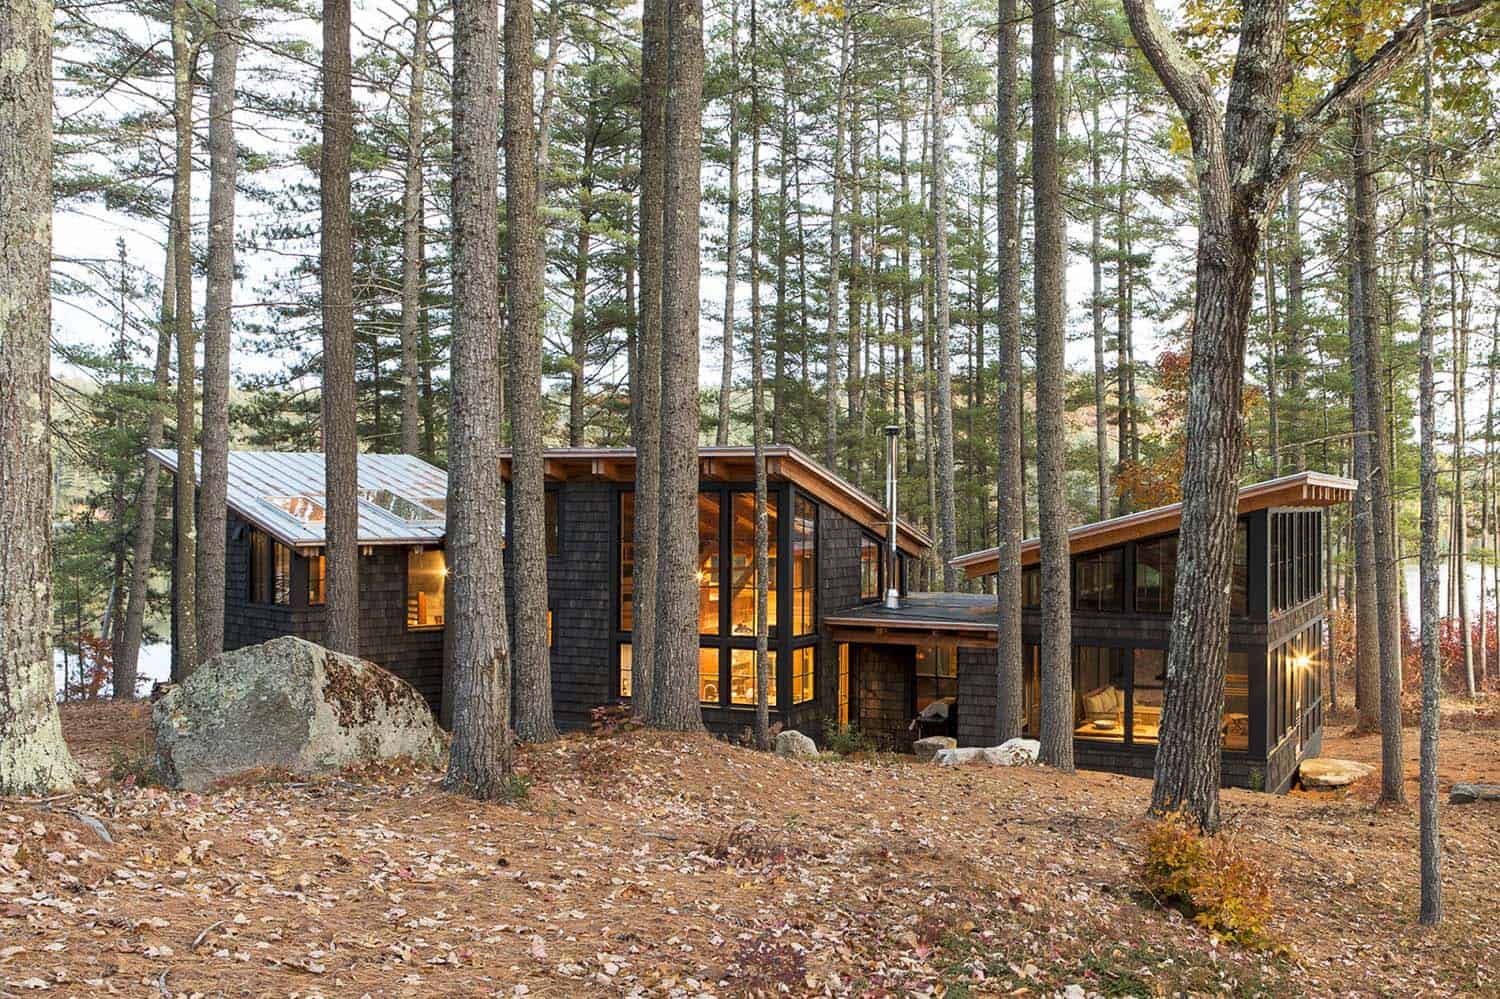 off-the-grid island camp exterior surrounded by woods